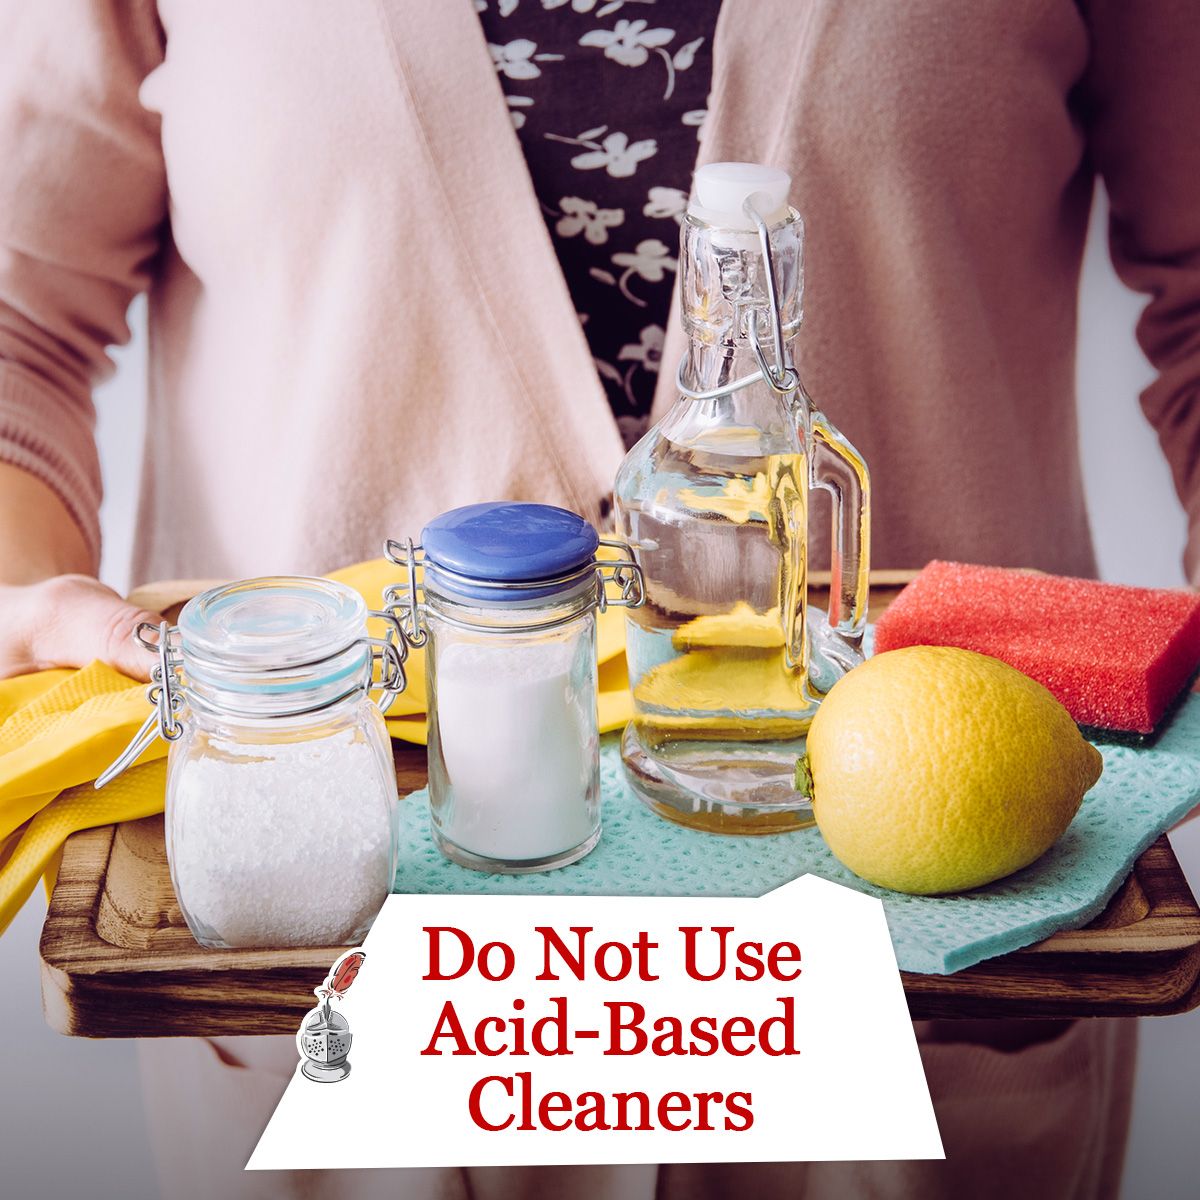 Do Not Use Acid-Based Cleaners